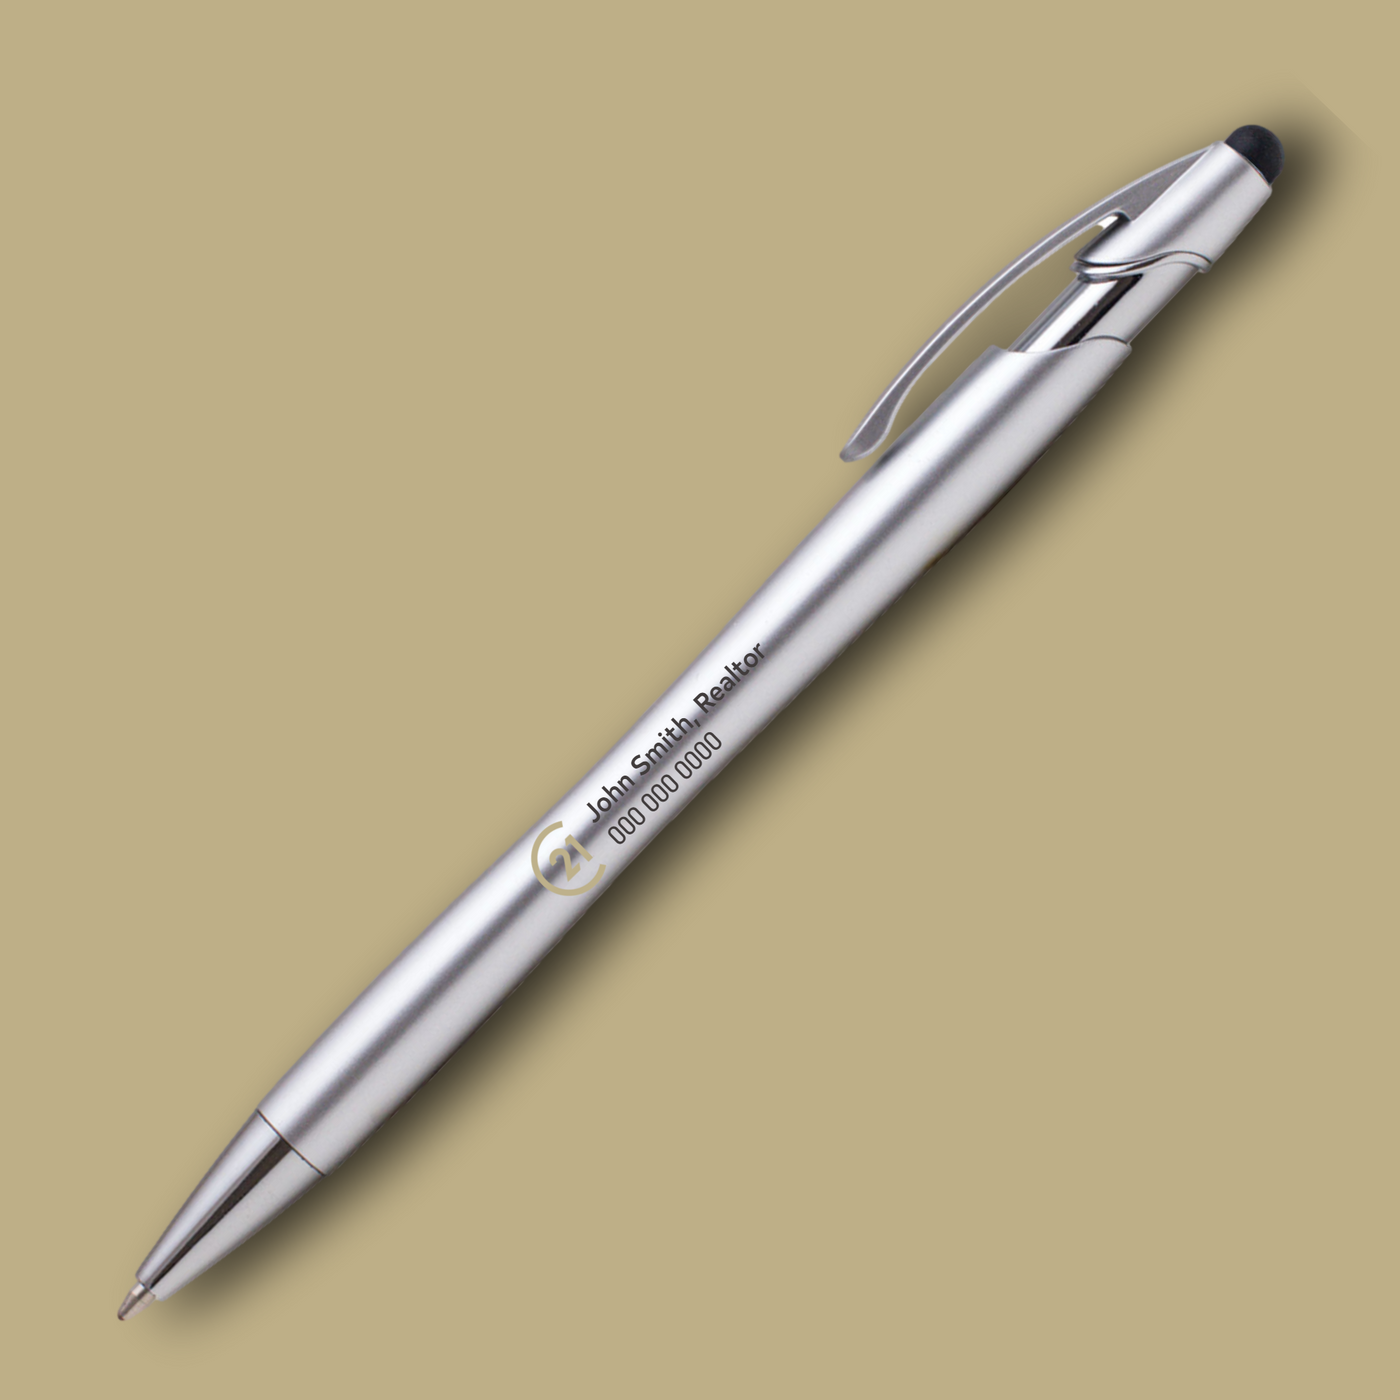 Solana Softy Metallic Pen With Stylus - Full Color with your logo